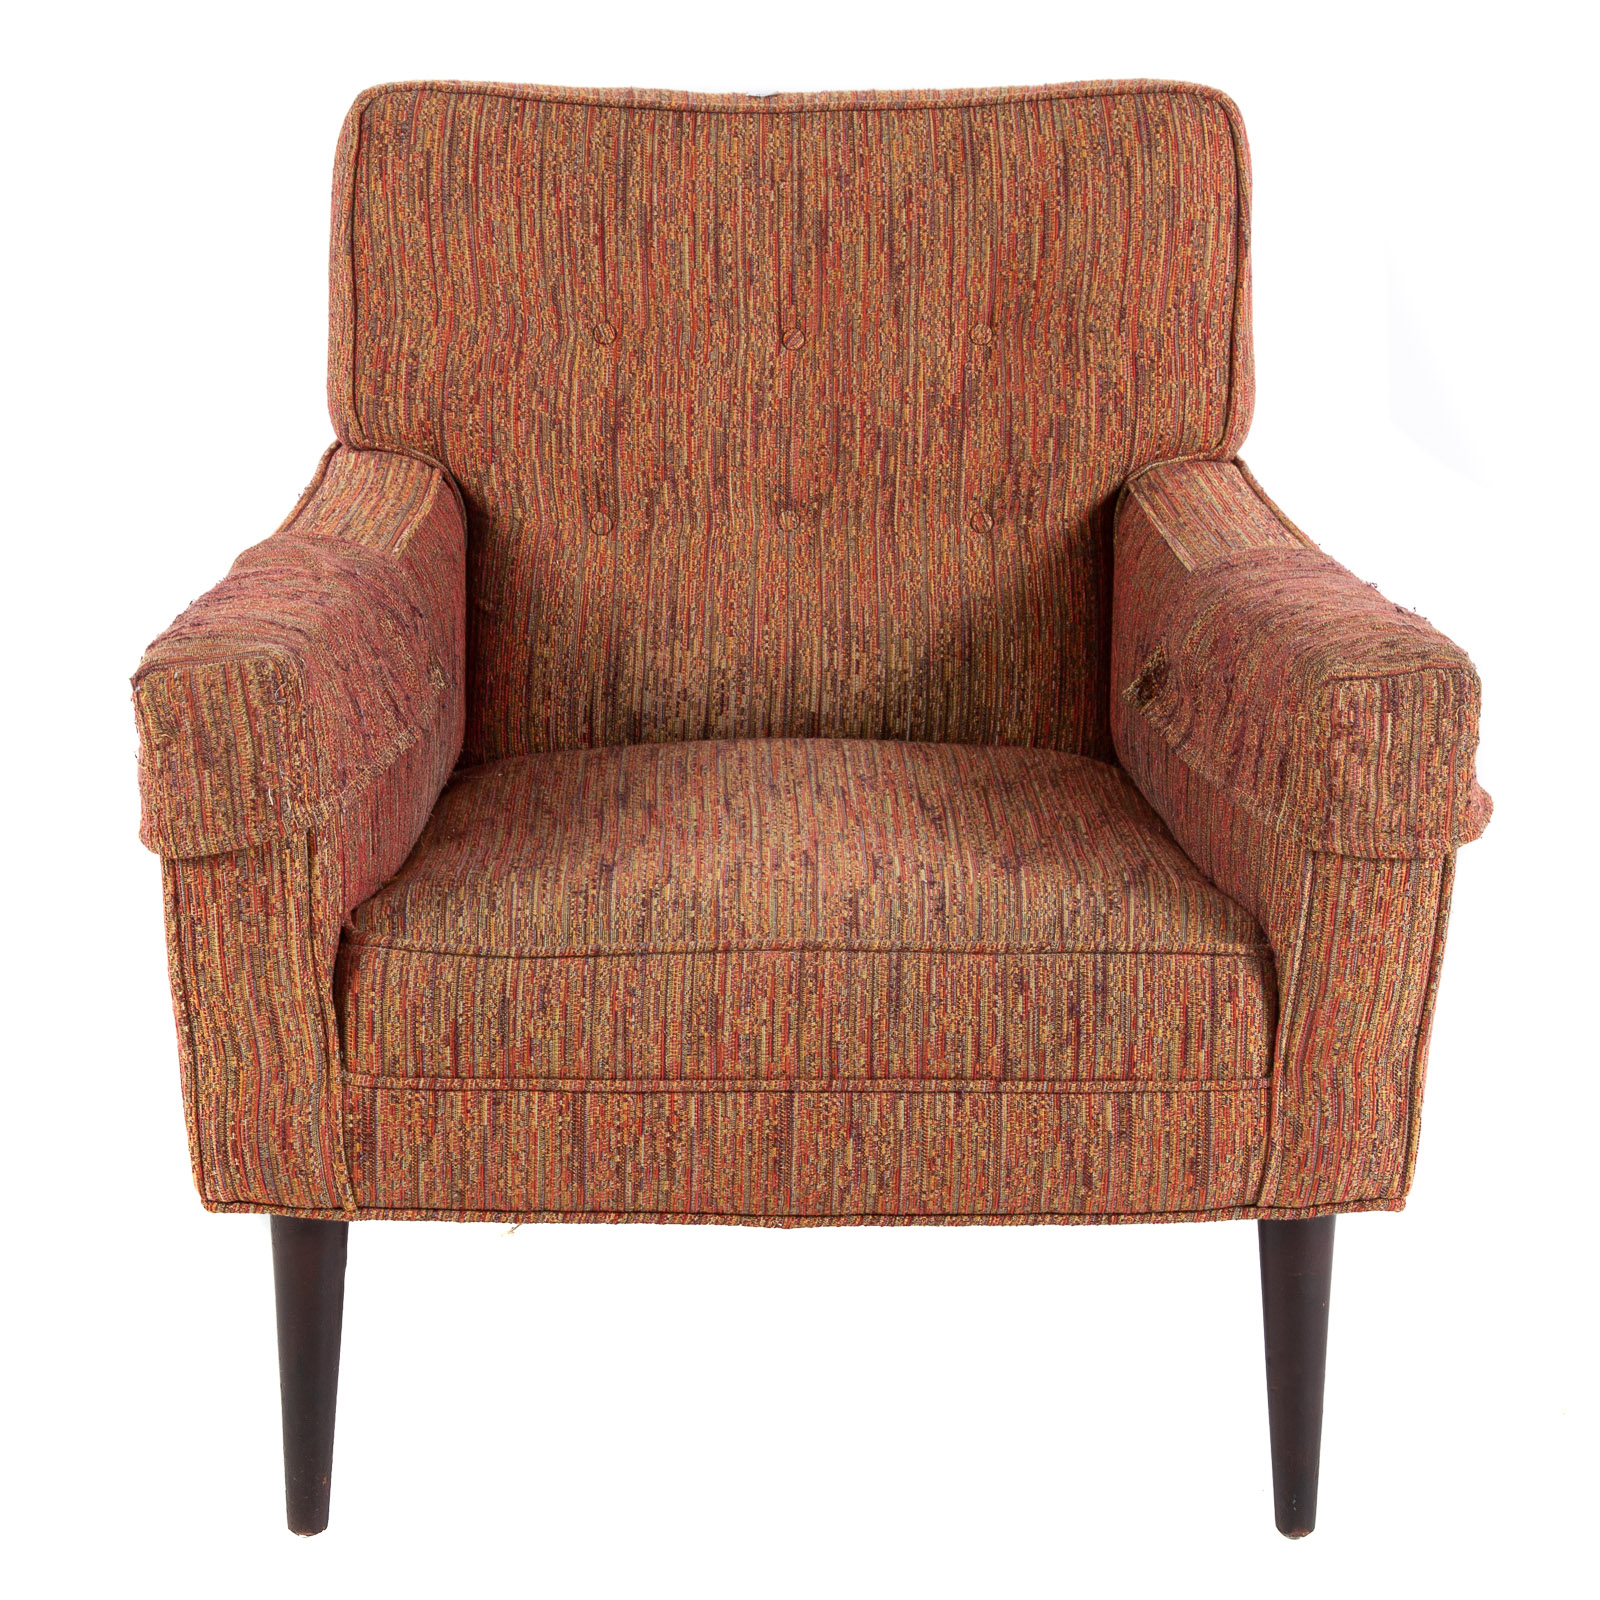 MID CENTURY UPHOLSTERED ARM CHAIR 338788